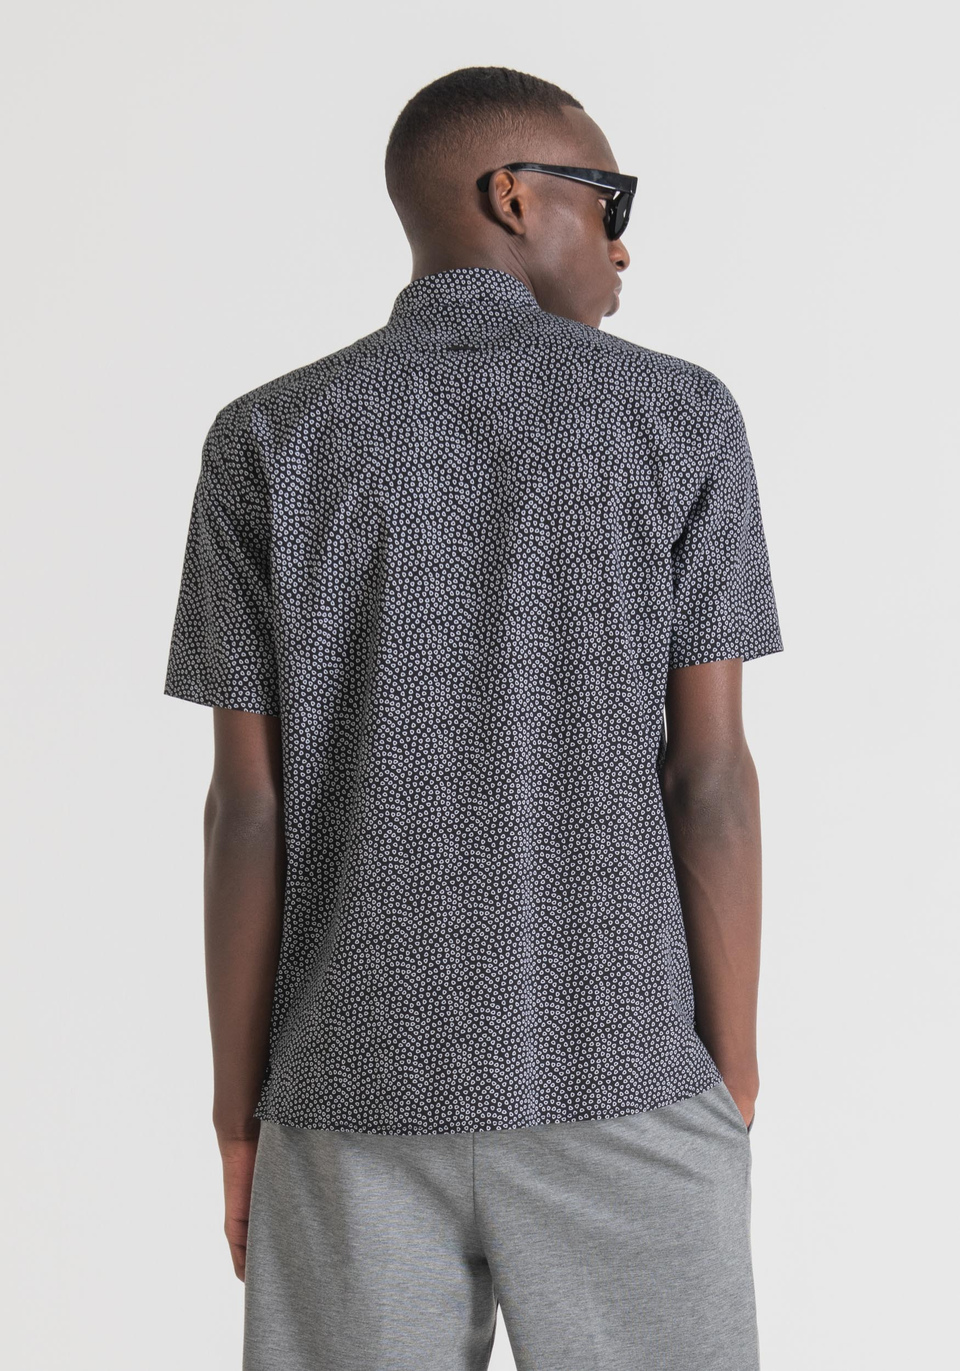 “BARCELONA” STRAIGHT-FIT SHIRT IN SOFT-TOUCH COTTON WITH MICROPATTERN - Antony Morato Online Shop